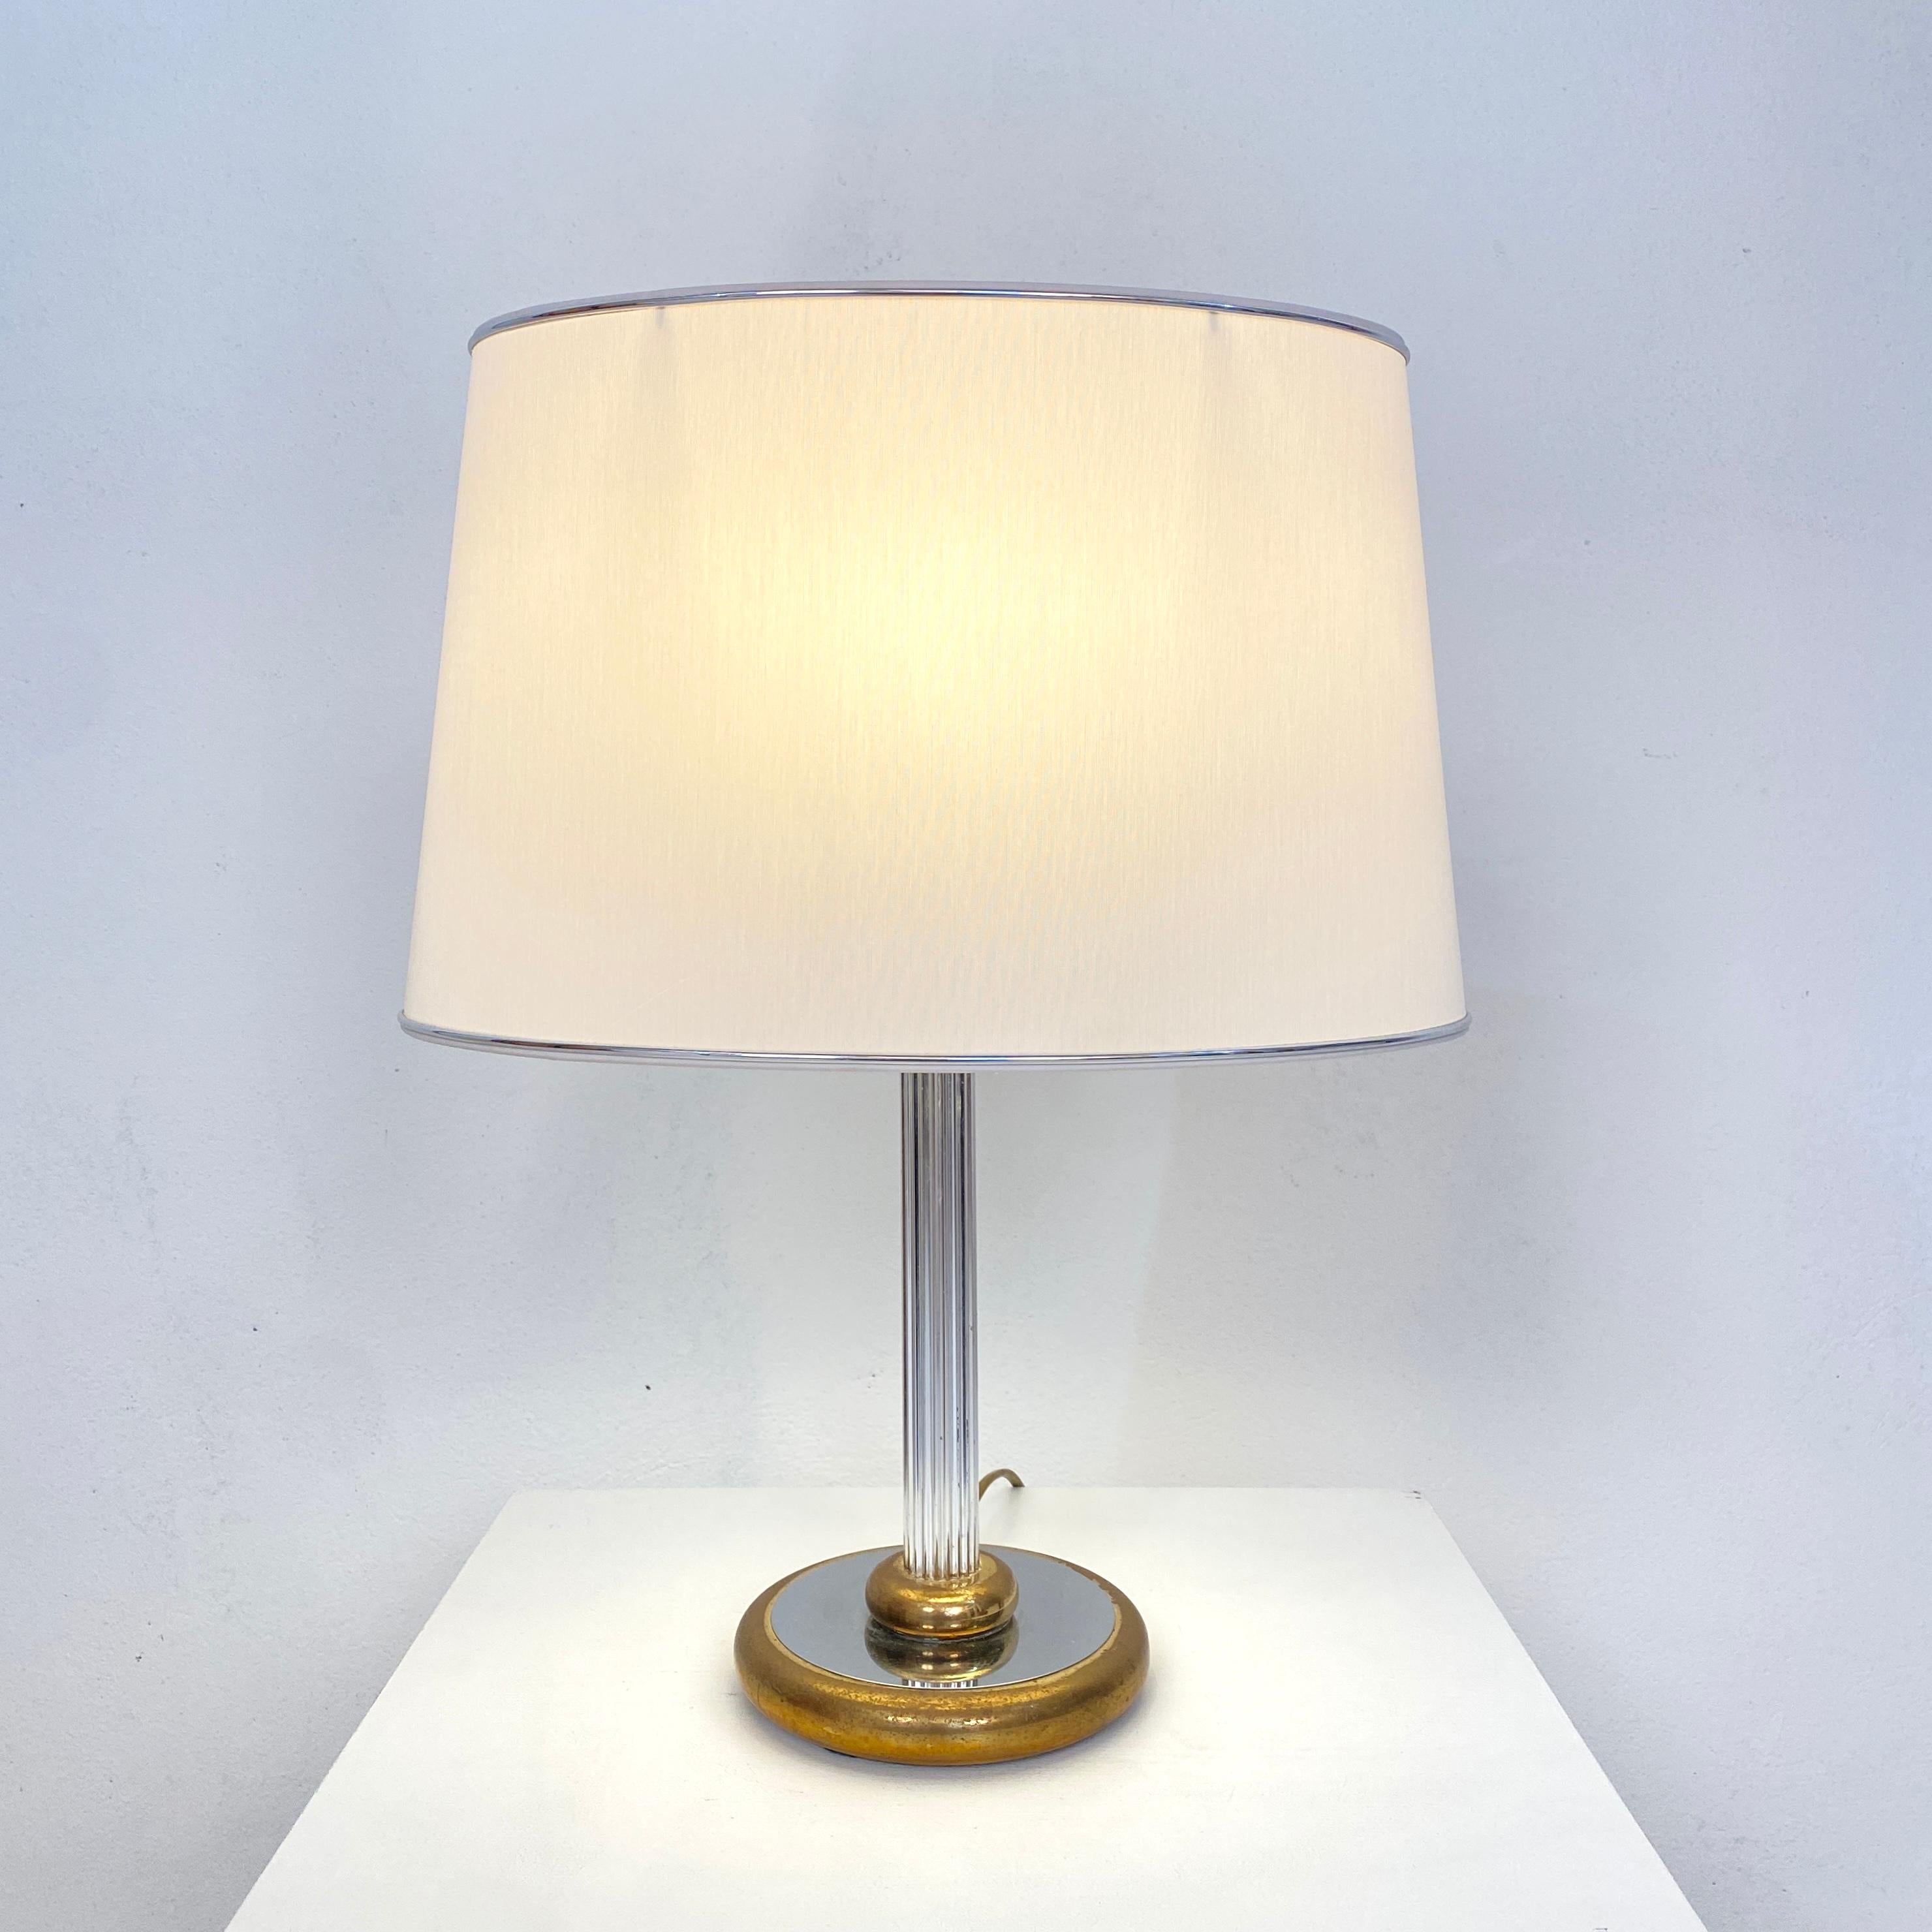 Midcentury German Table Lamp by Aro-Leuchte in Chrome and Brass, circa 1970 In Good Condition For Sale In Berlin, DE